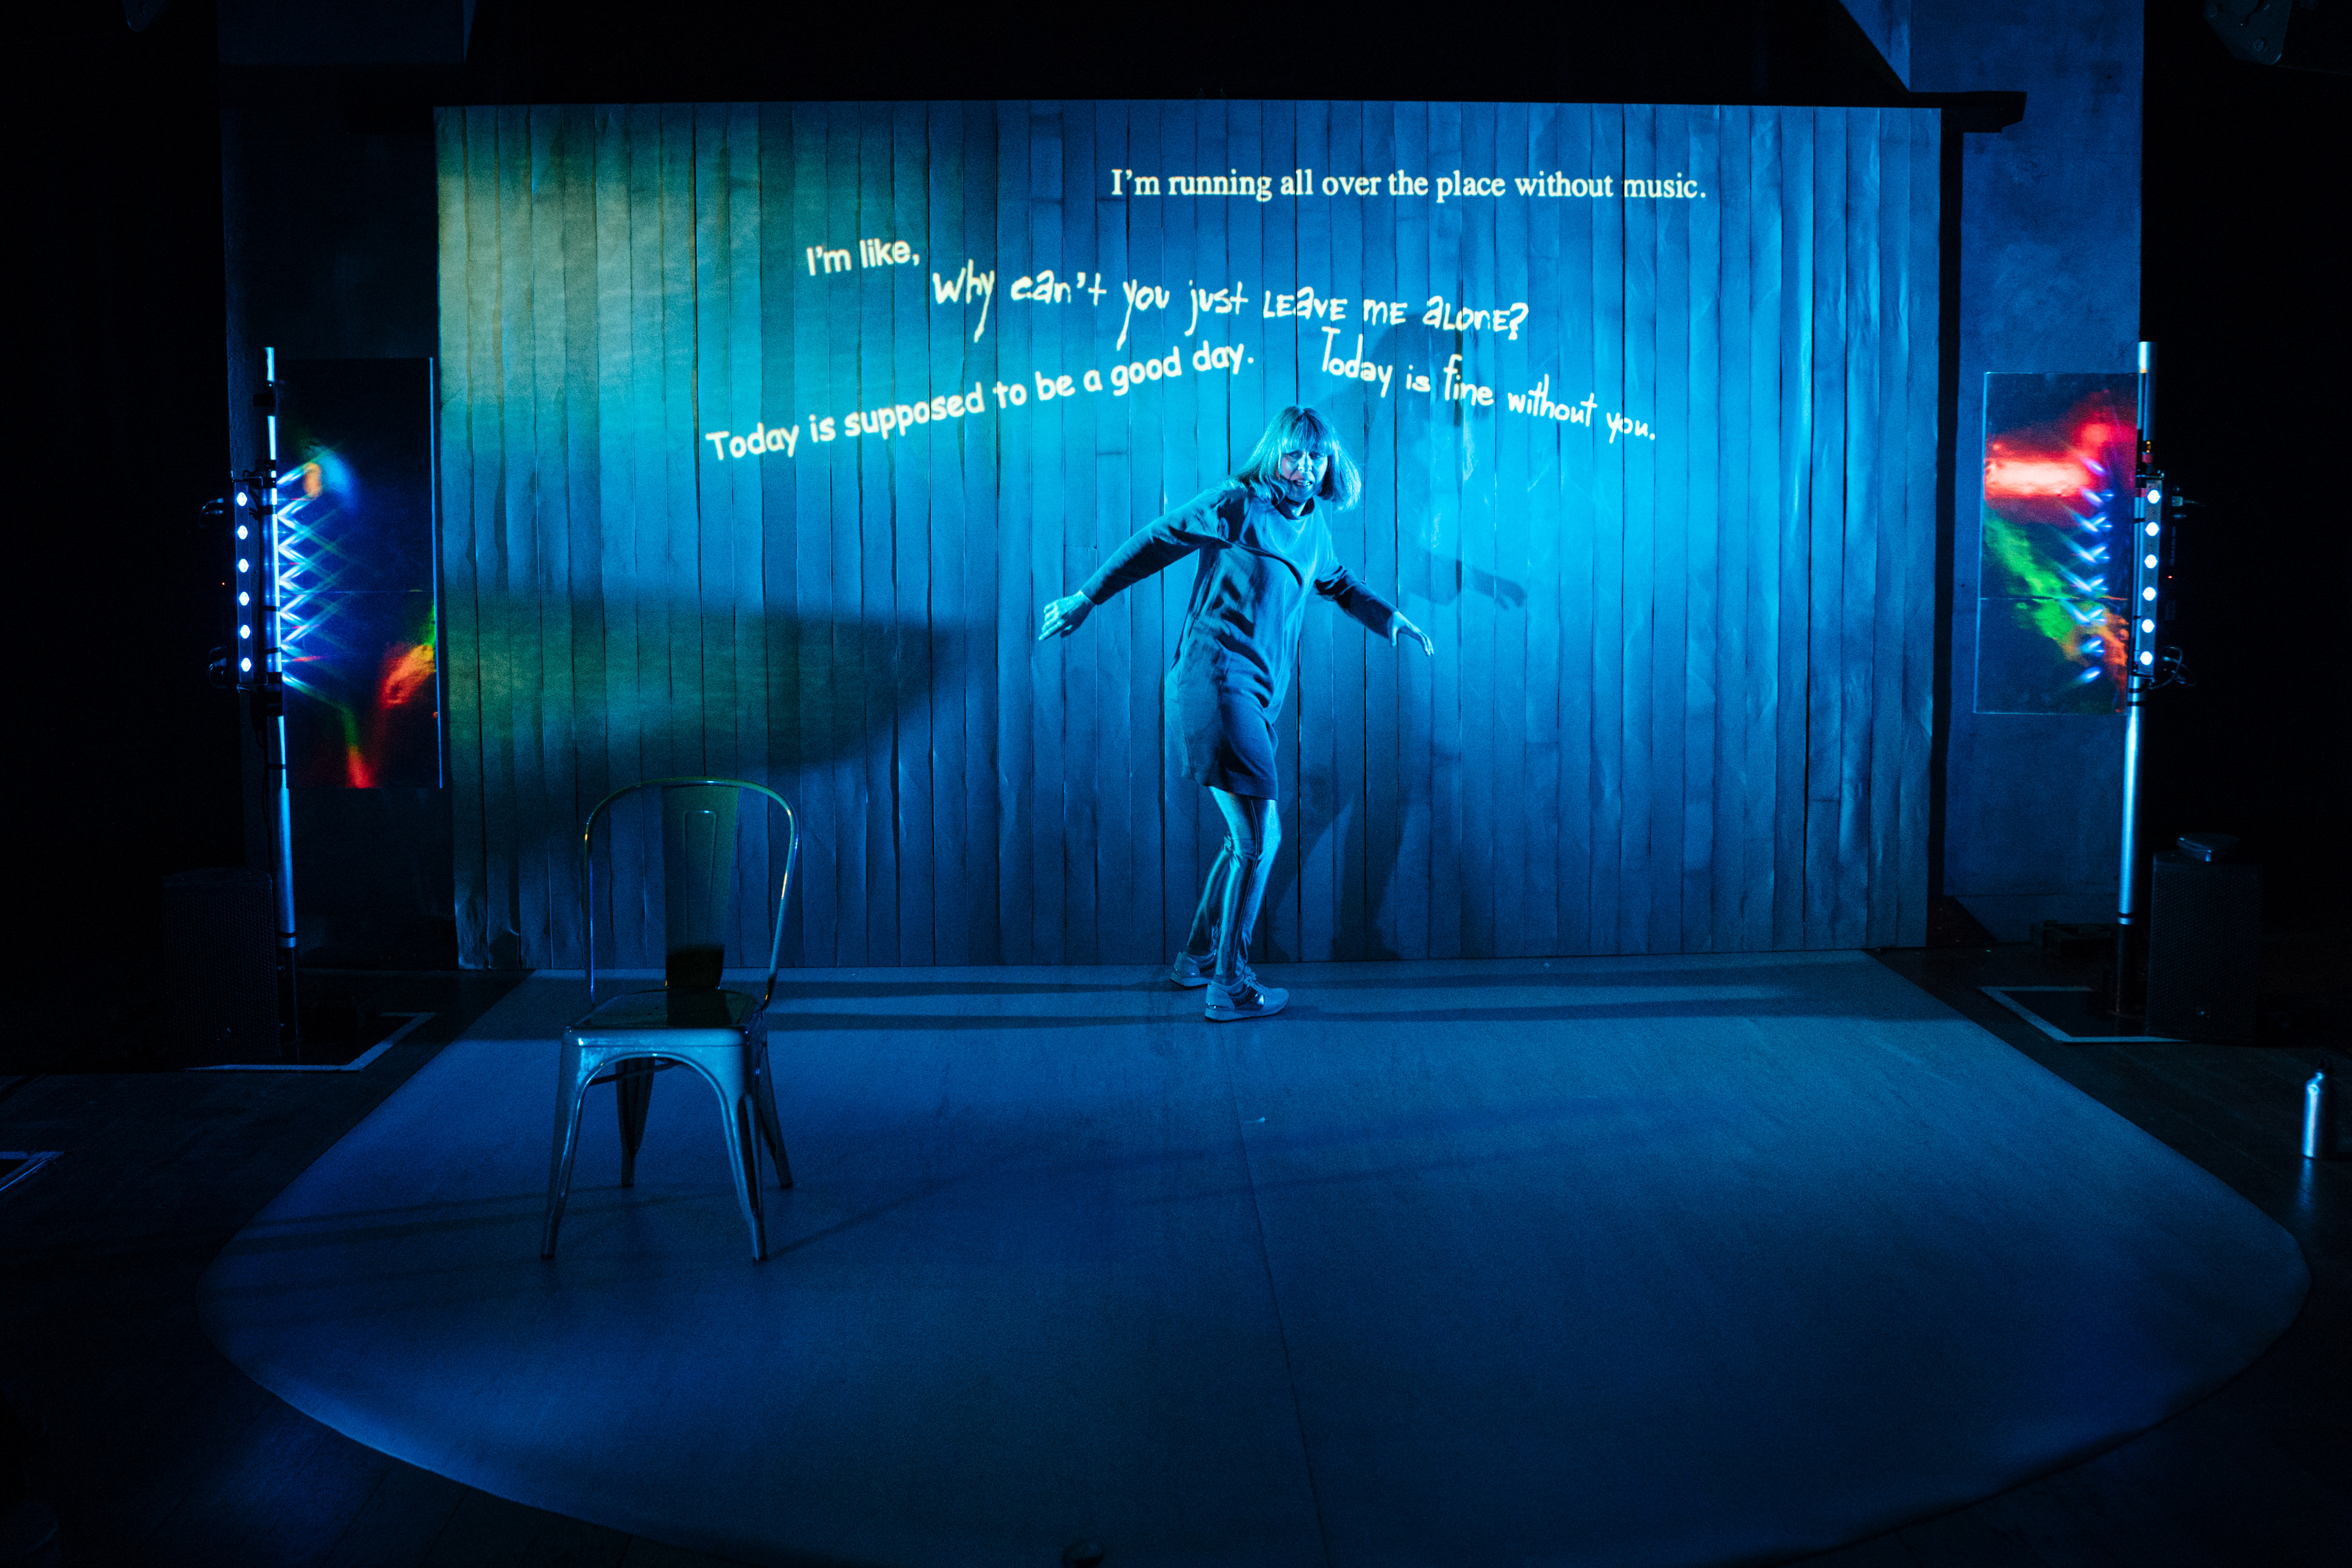 sophie cringes on a blue lit stage as if scared by an unseen enemy. behind her text is projected ,phrases such as 'why cna't you just leave me alone' and 'i'm running all over the place without music'. behind sophie is a slatted curtain. she stands on a lip shaped mat on the stage. there is a simple metal chair and sci fi style lights at the side of the stage. sophie wears a dress silver leggings and has bobbed hair that flies out as she swivels.